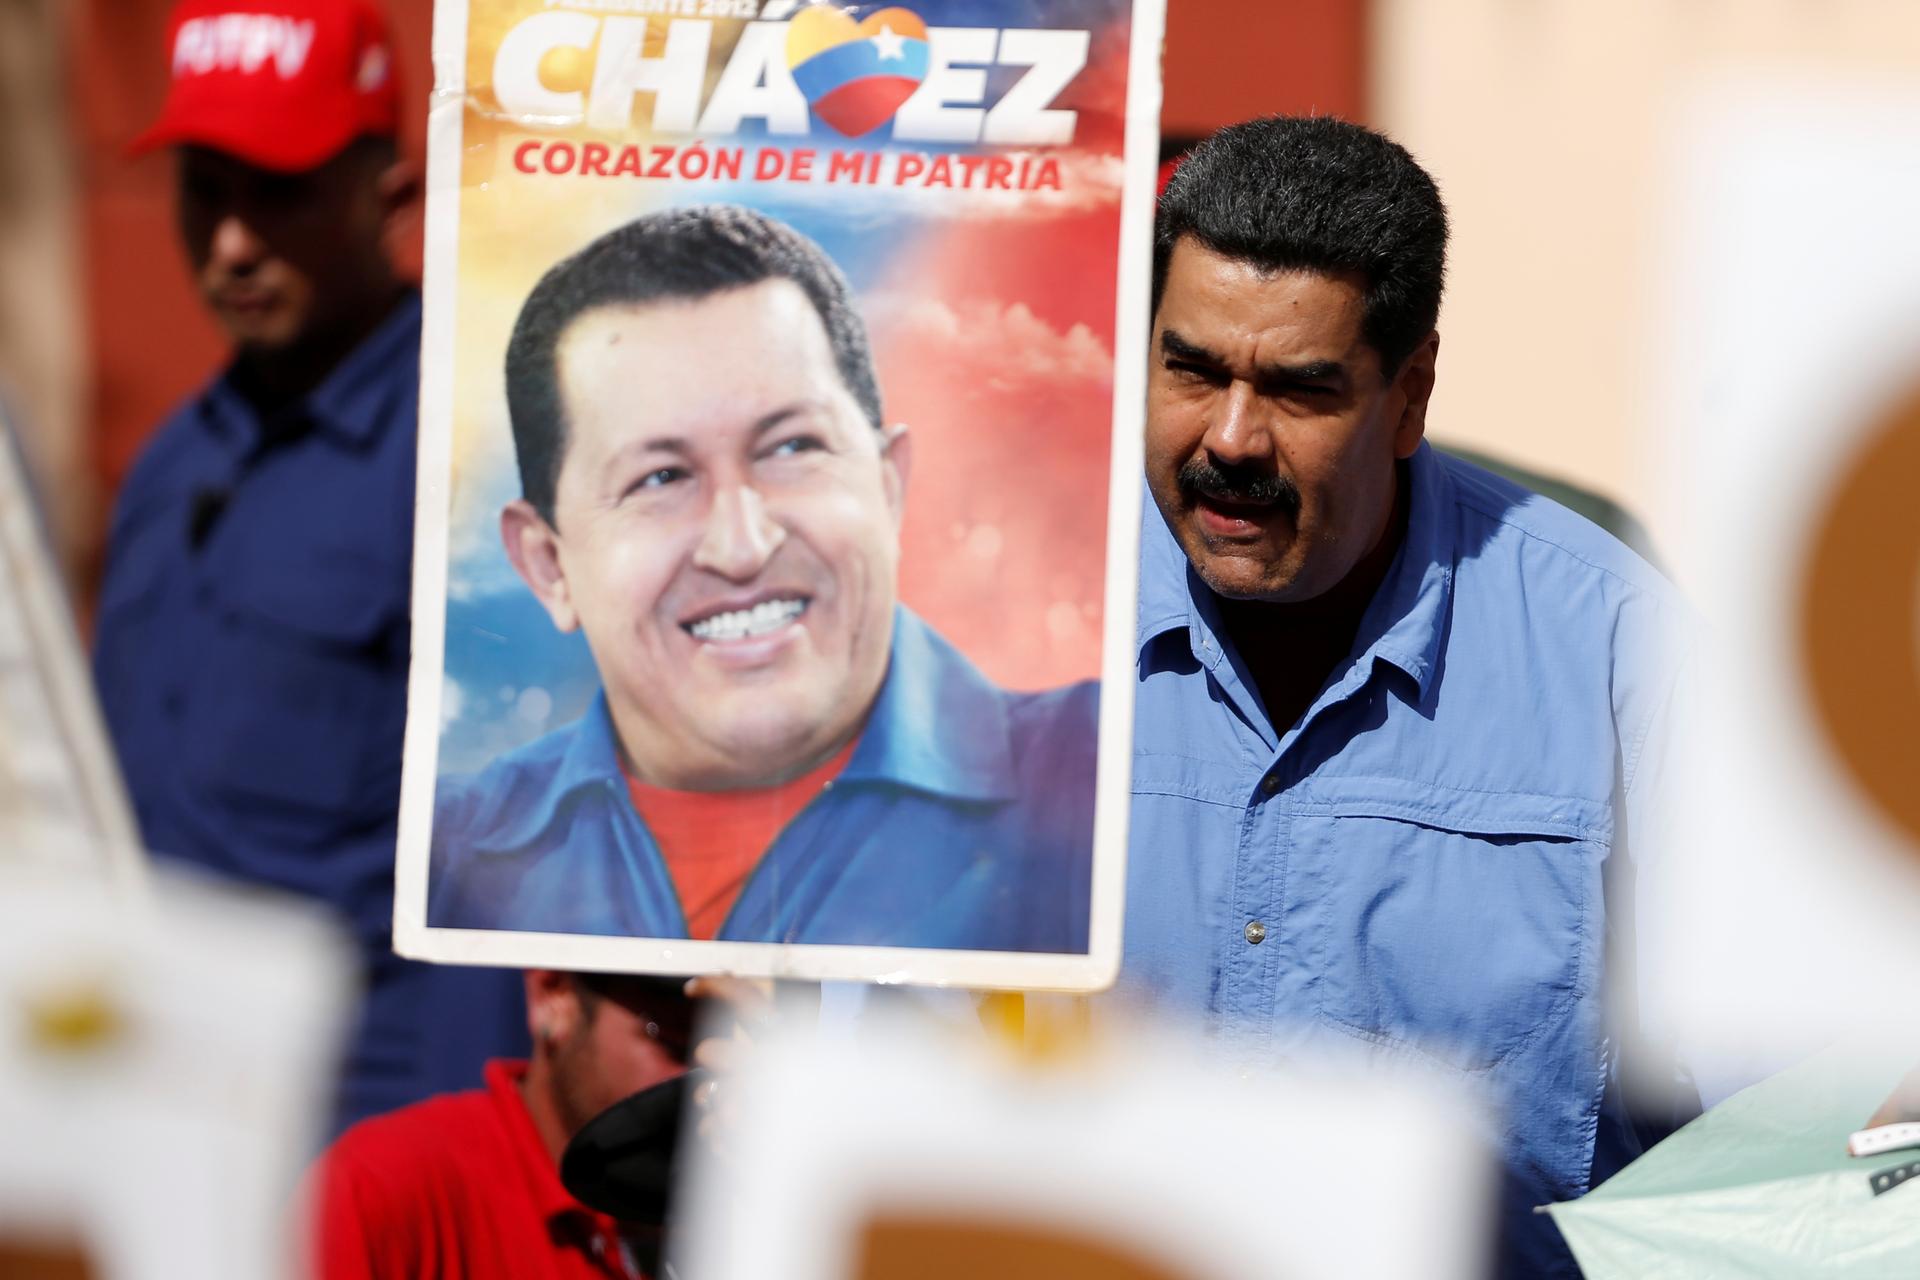 Venezuela's President Nicolas Maduro greets supporters next to a placard with an image of Venezuela's late President Hugo Chavez, at Miraflores Palace in Caracas, Venezuela May 24, 2016.